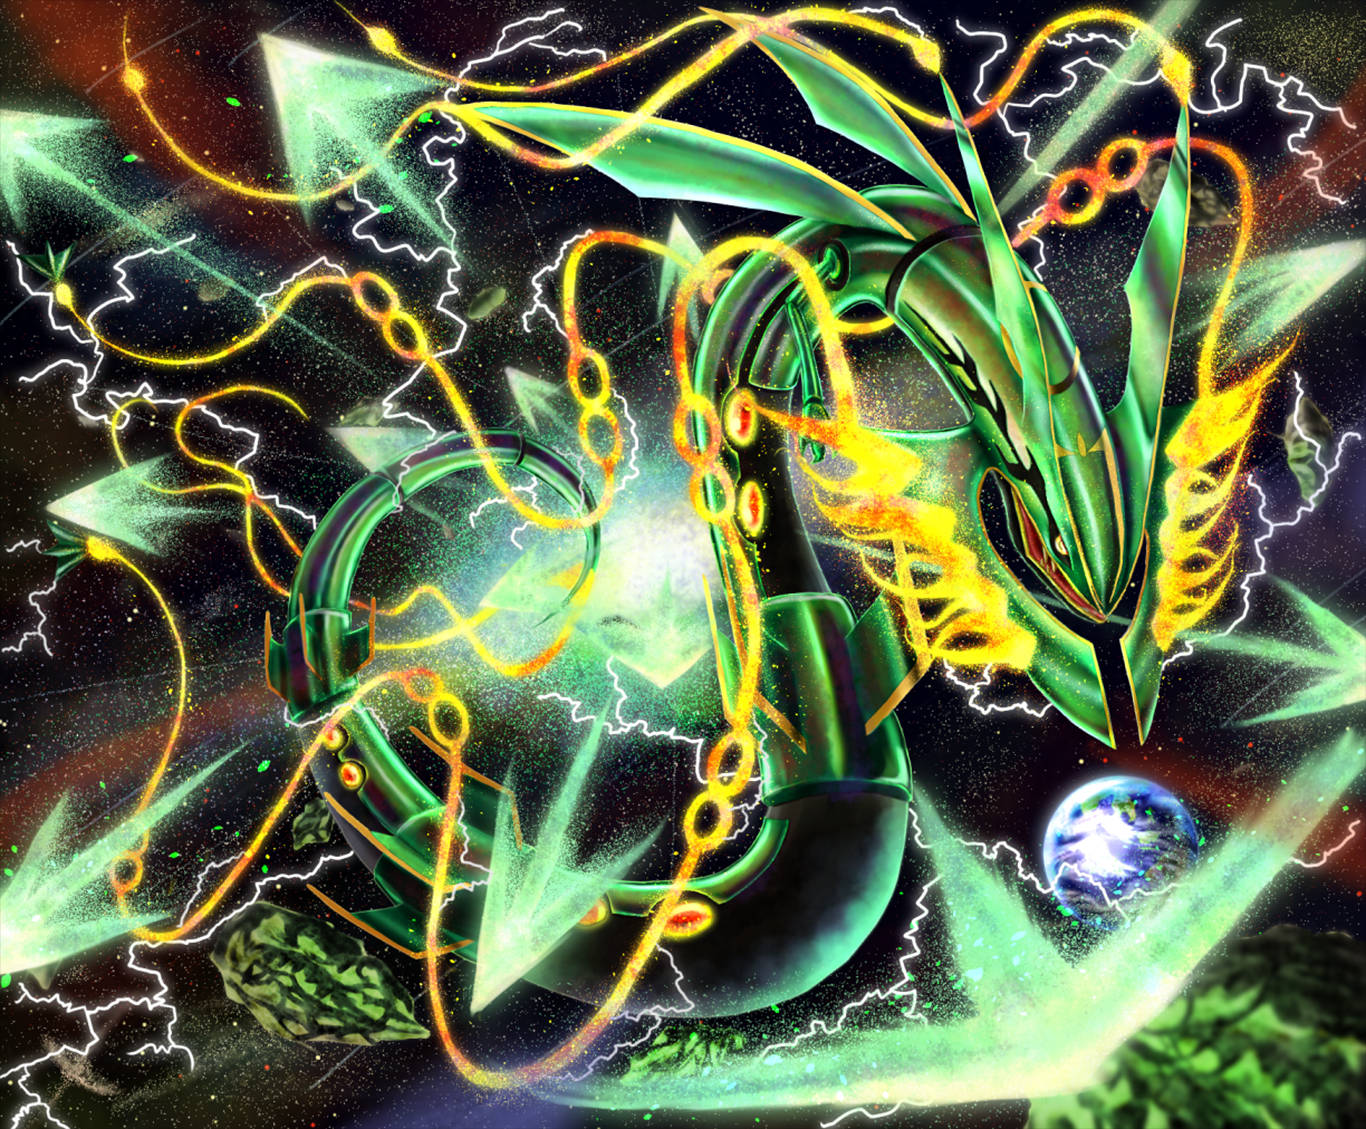 A Powerful Green Rayquaza Soars In Space